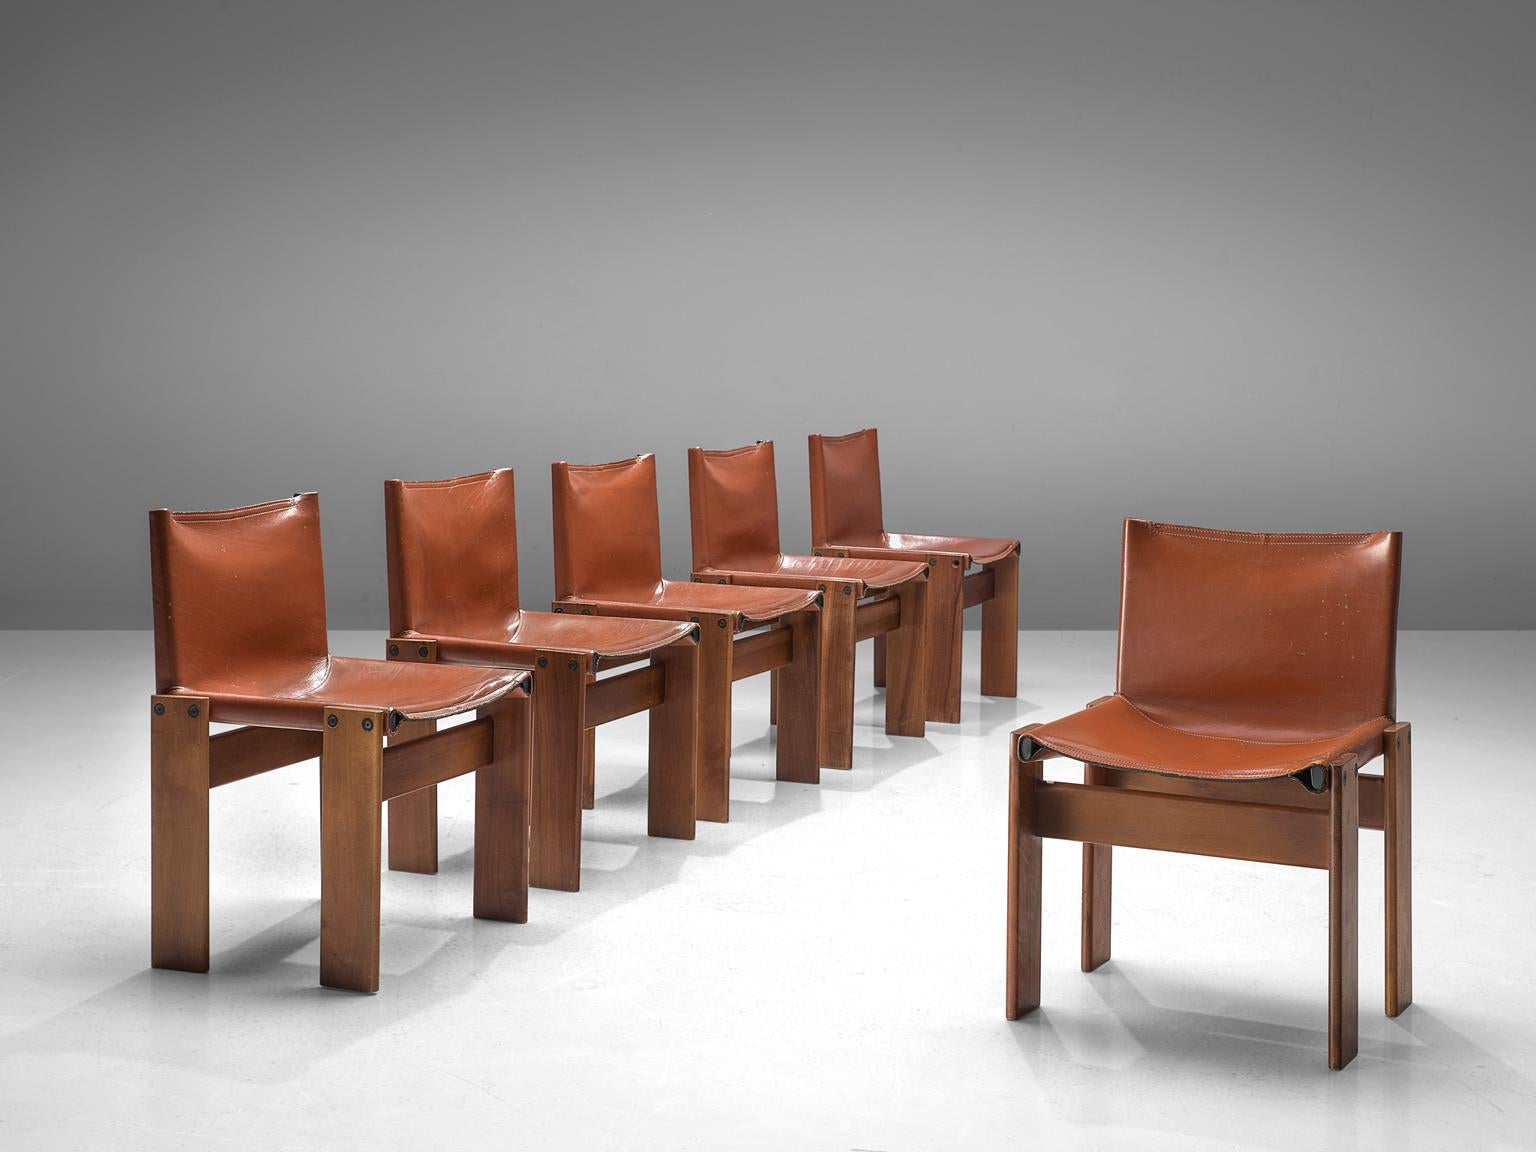 Afra & Tobia Scarpa, set of six monk dining chairs, wood and patinated cognac leather, Italy, 1974.

The wonderfully dark red leather forms a striking combination with the walnut wood. Interesting is the 'flat' shape of this chair where the